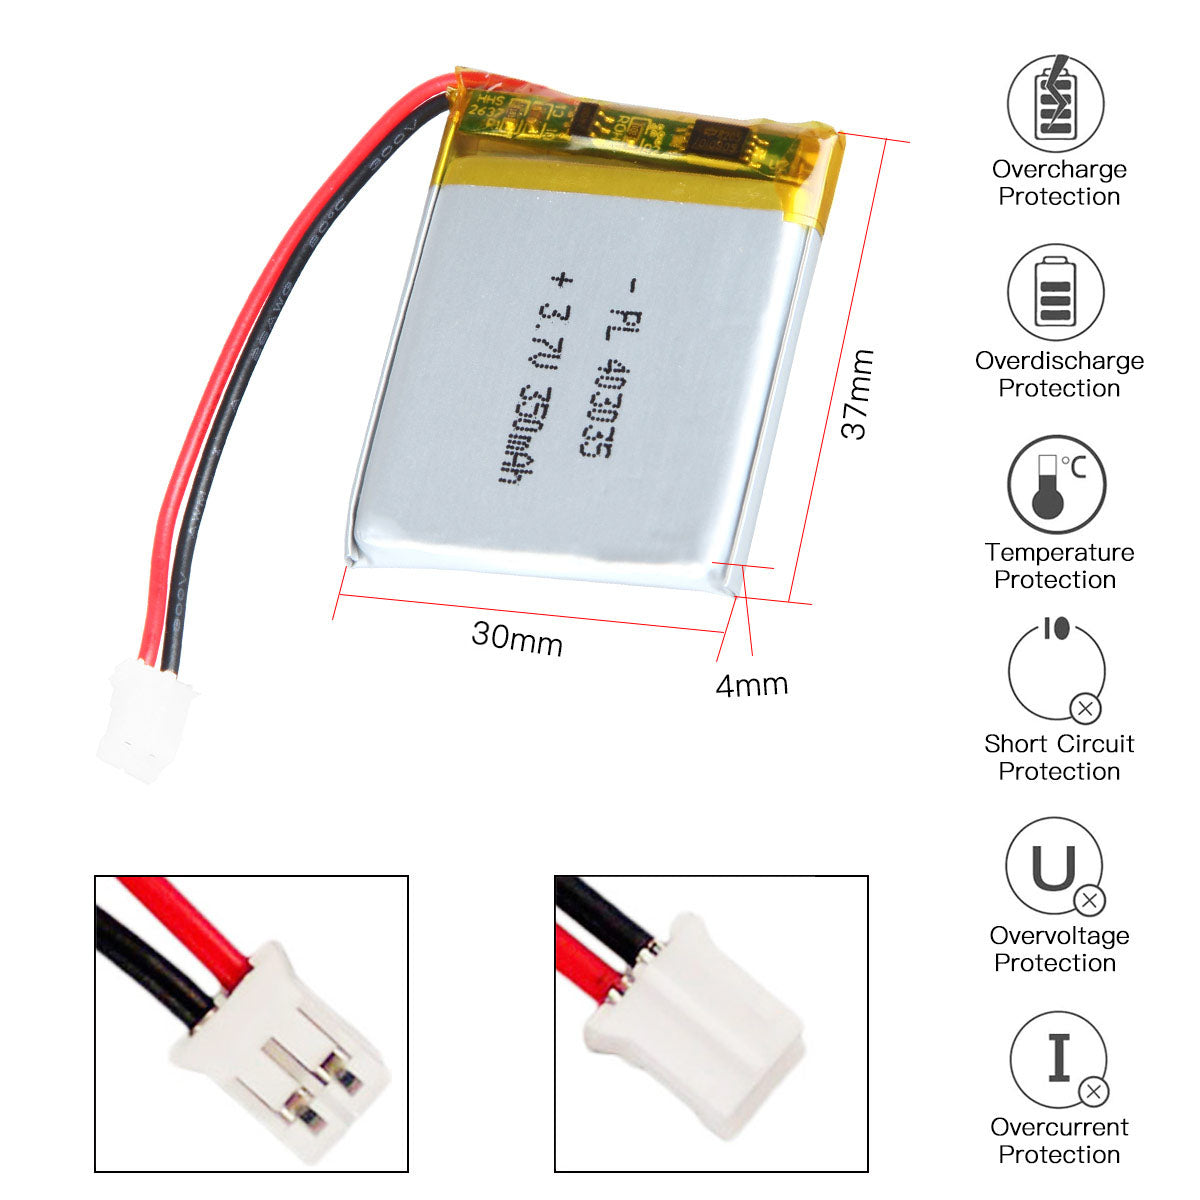 YDL 3.7V 350mAh 403035 Rechargeable Lithium Polymer Battery Length 37mm